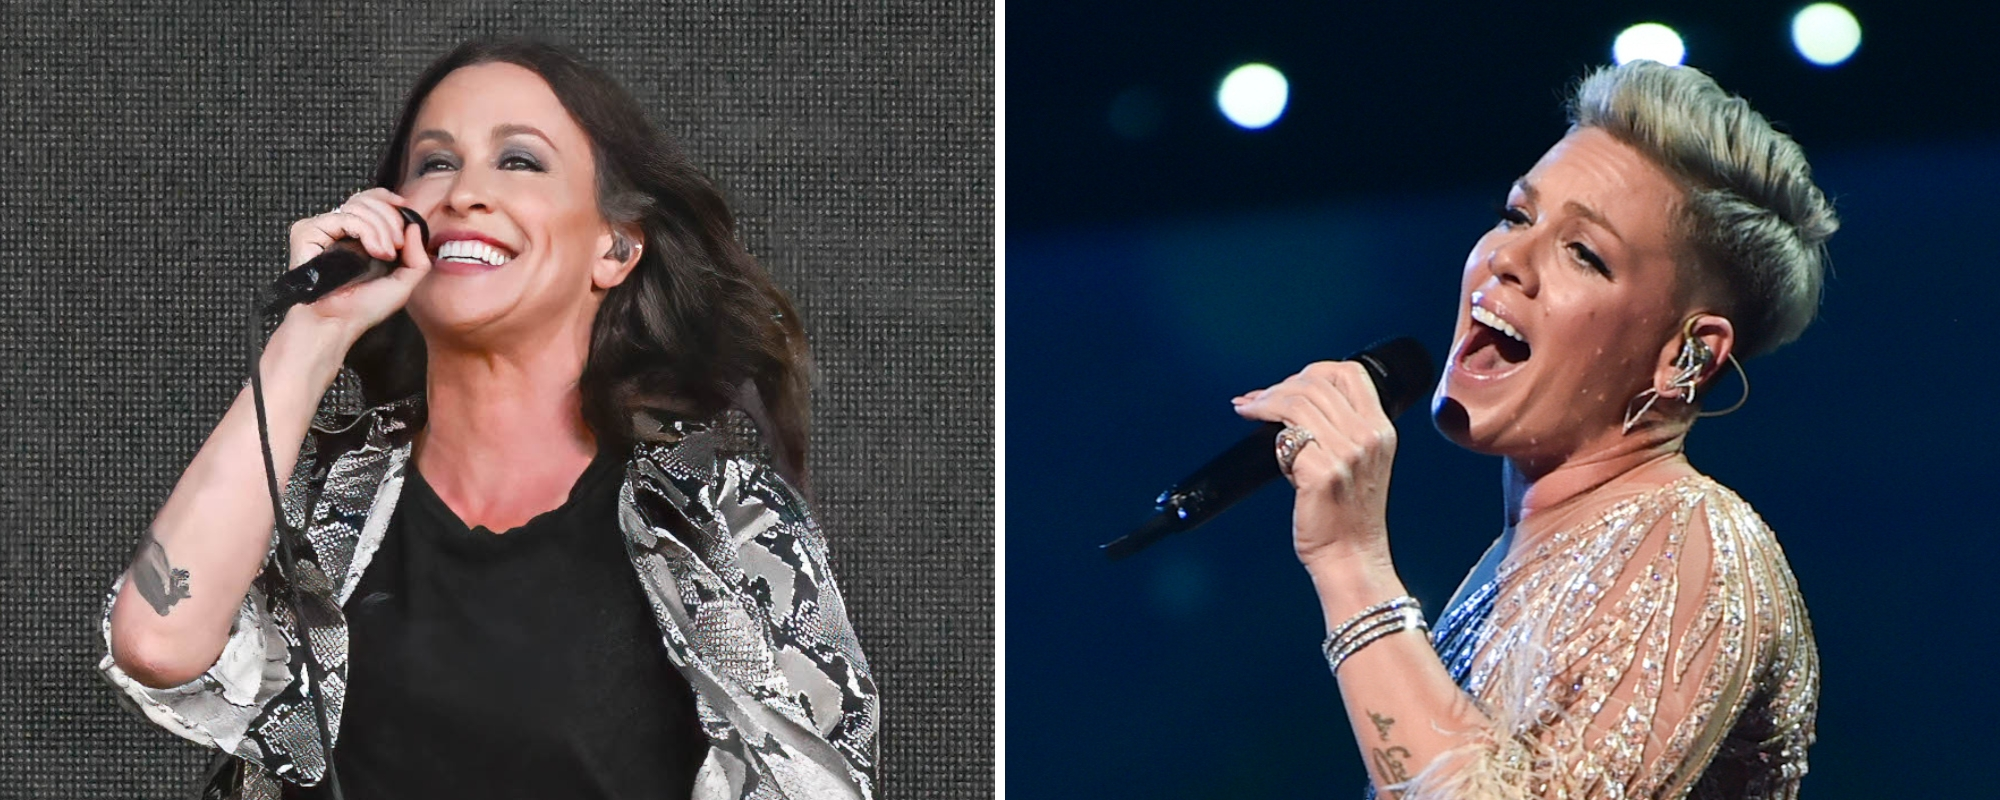 Watch Alanis Morissette Join P!nk for a Surprise Performance of “You Oughta Know” In Los Angeles